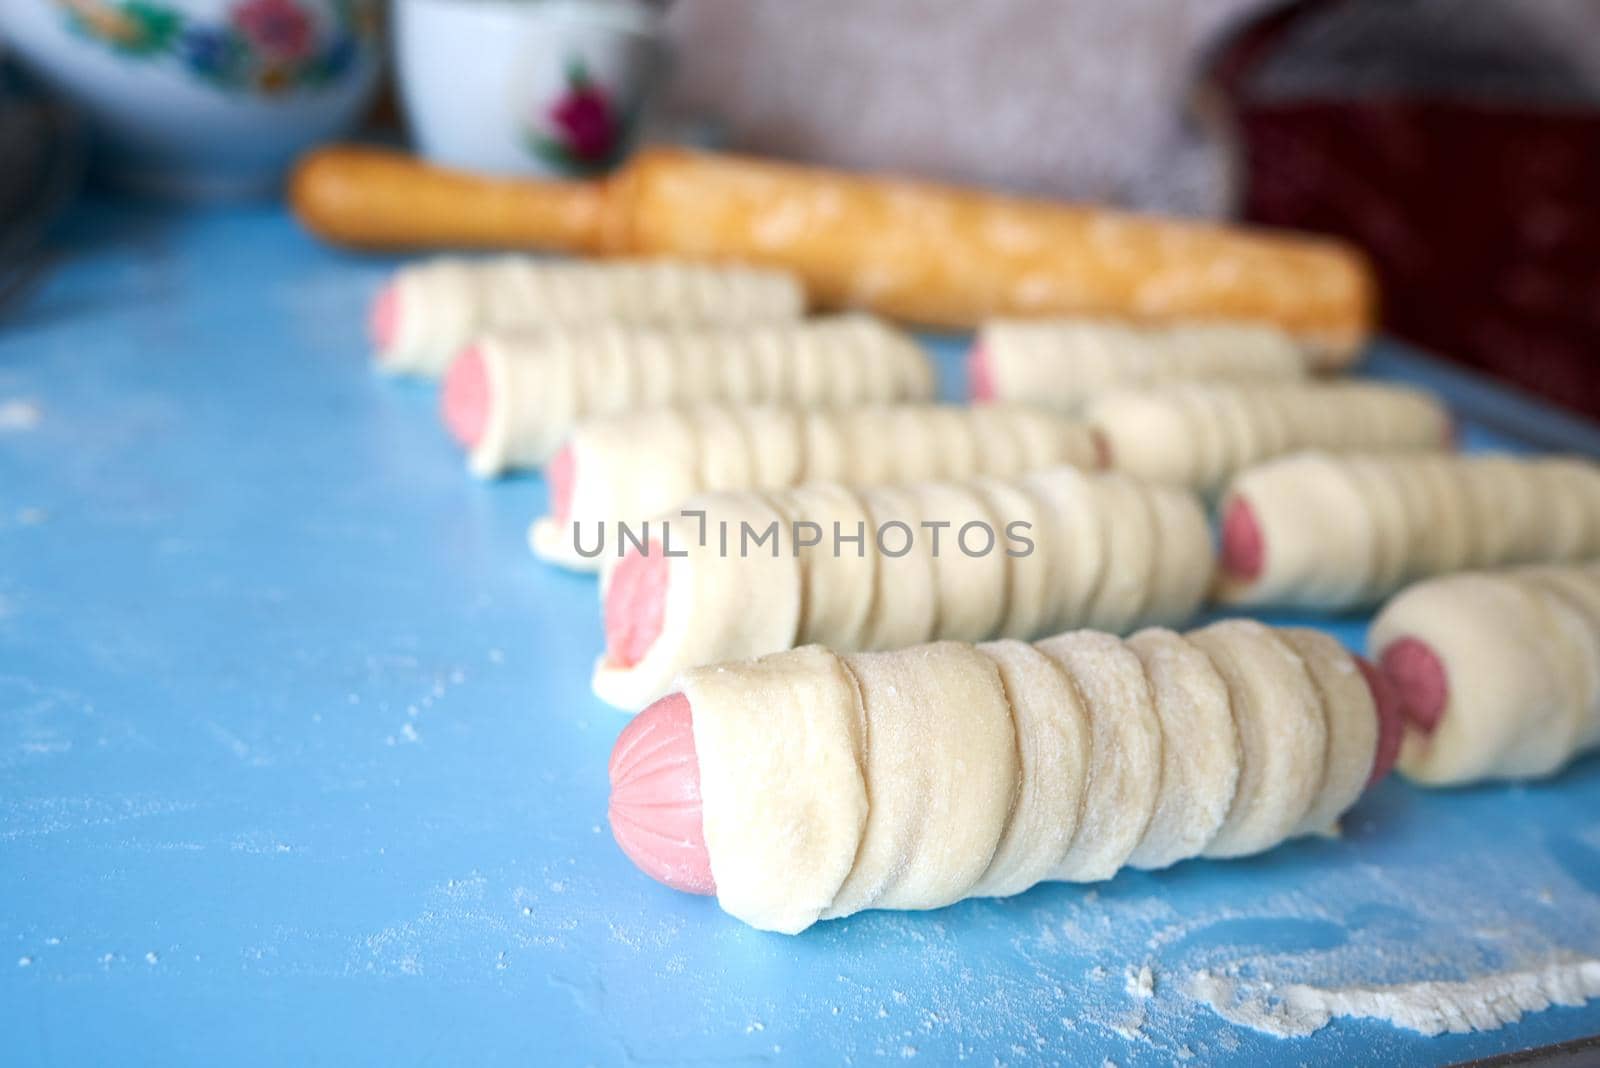 Blanks for fried pies. The sausages are wrapped in thin strips of yeast dough. The dough is rising. Selective focus